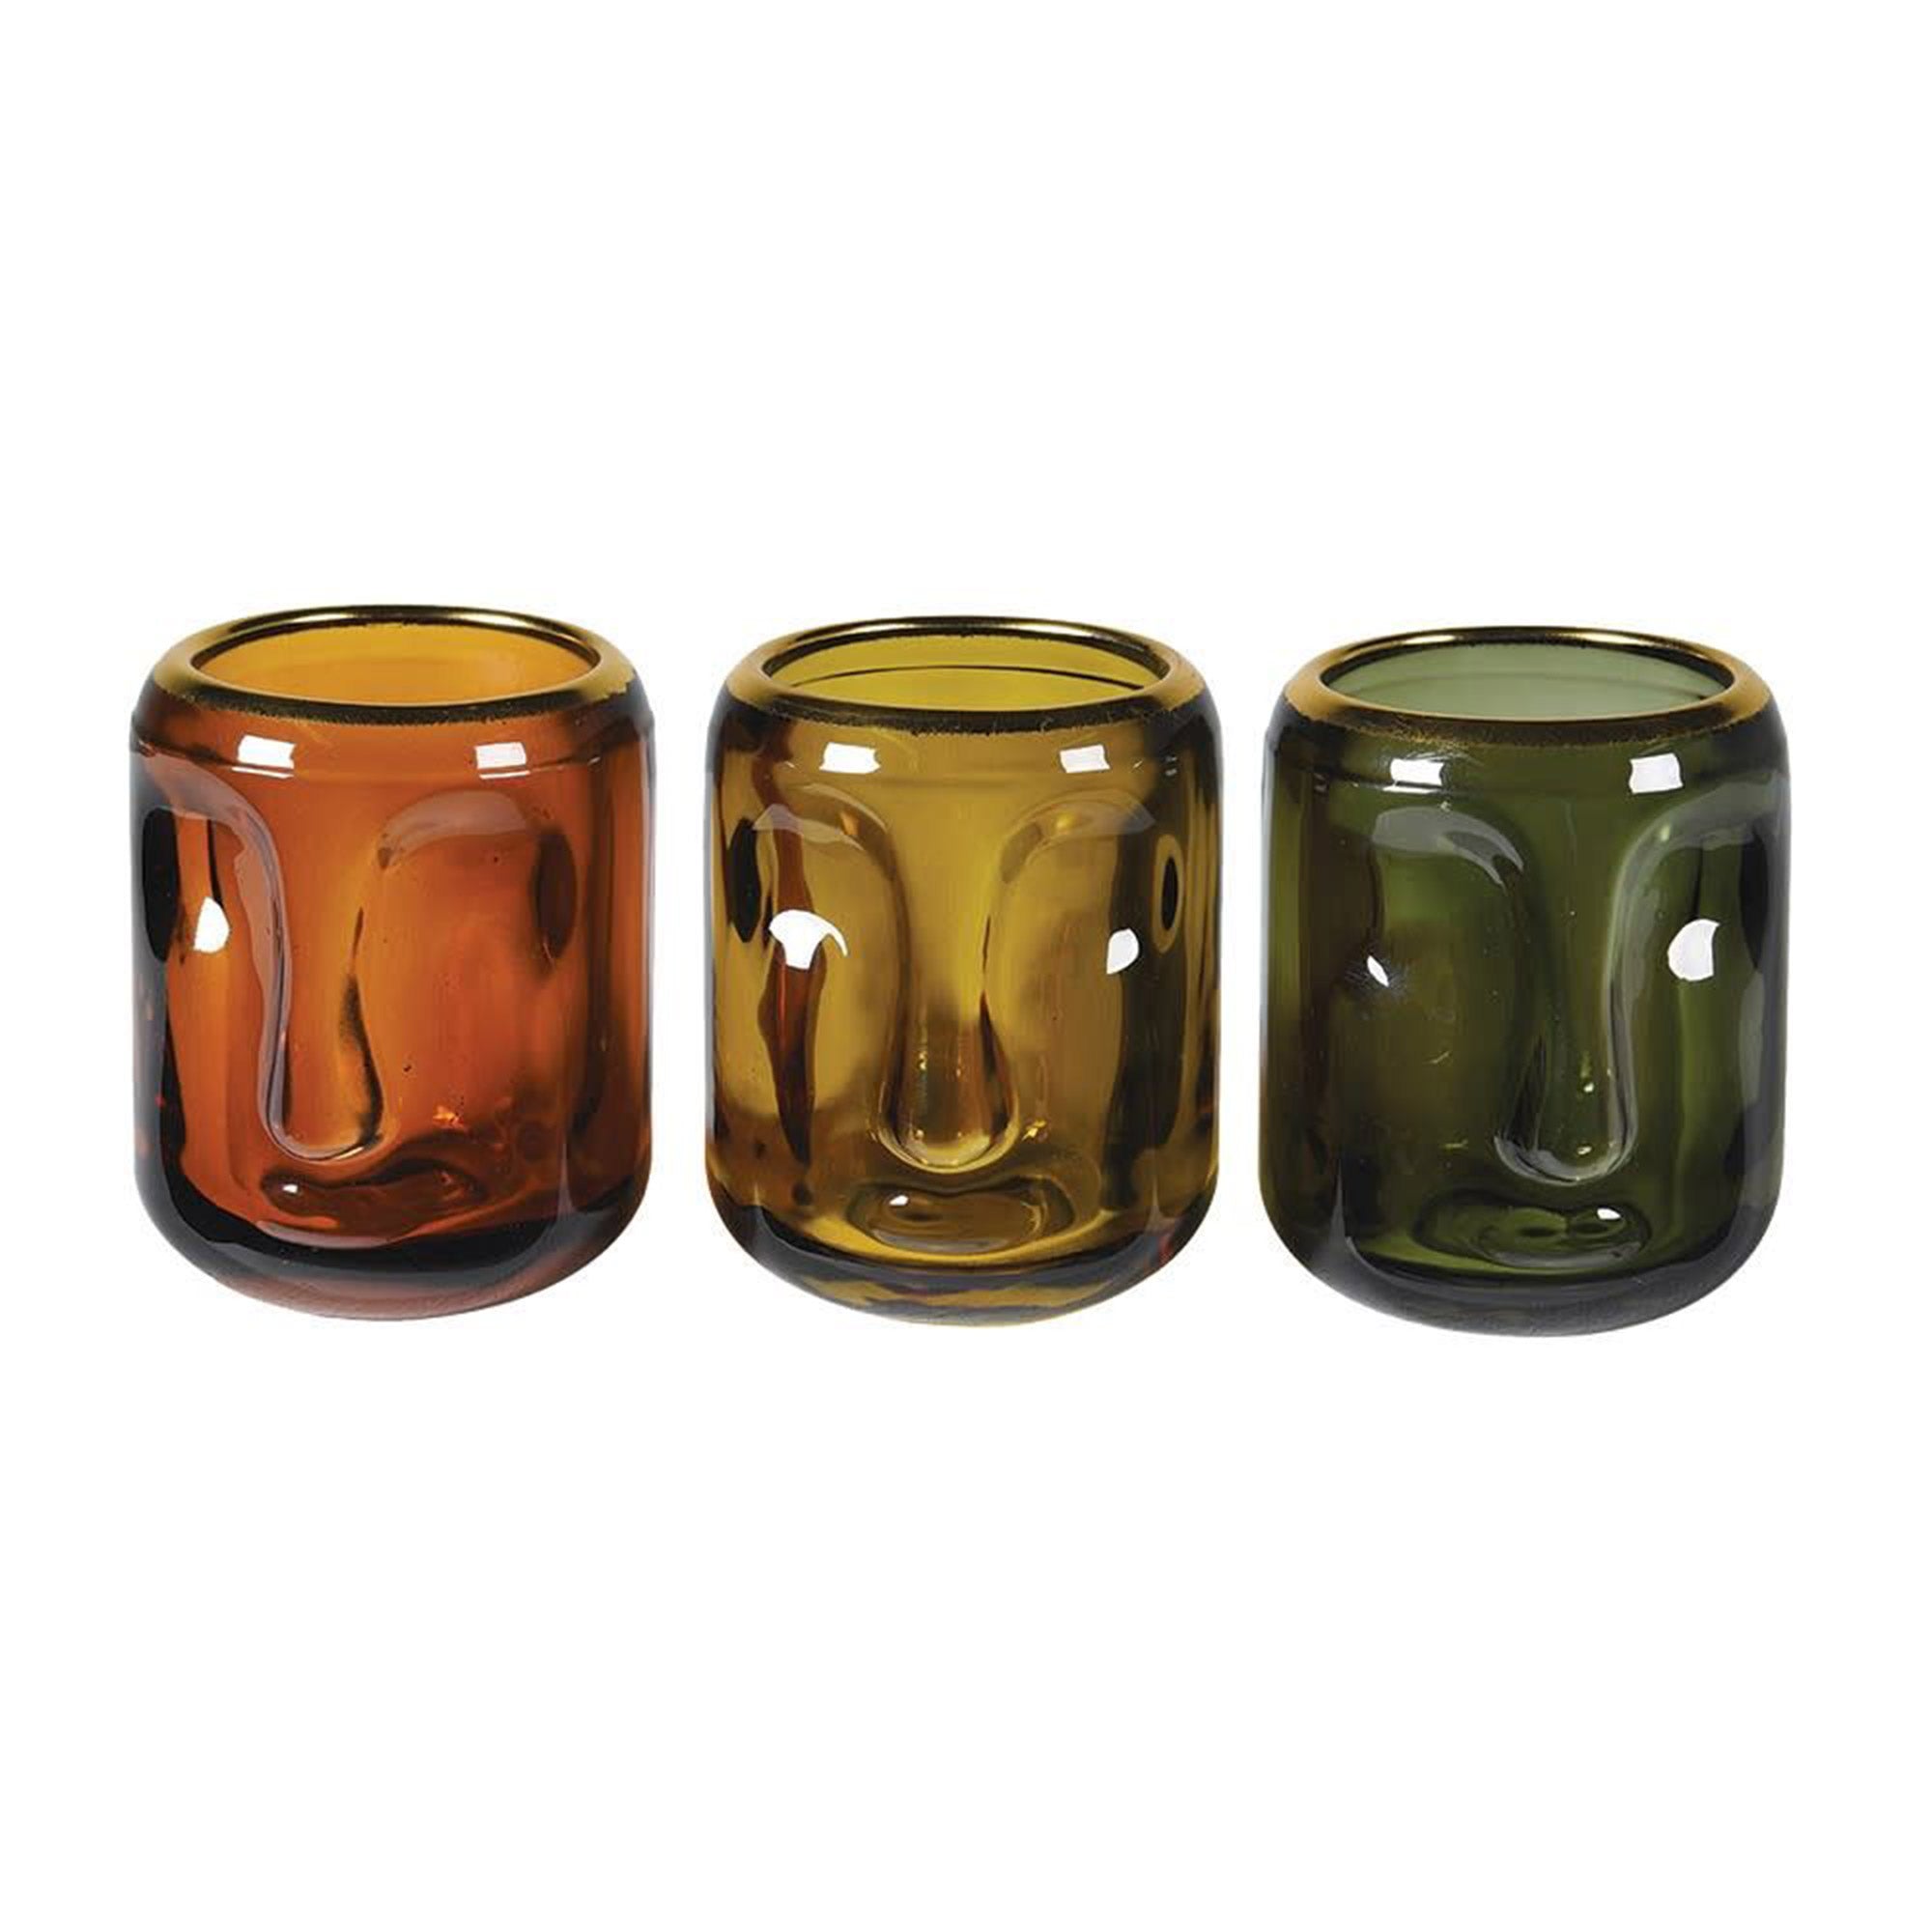 Face Candle Holders - Set of 3